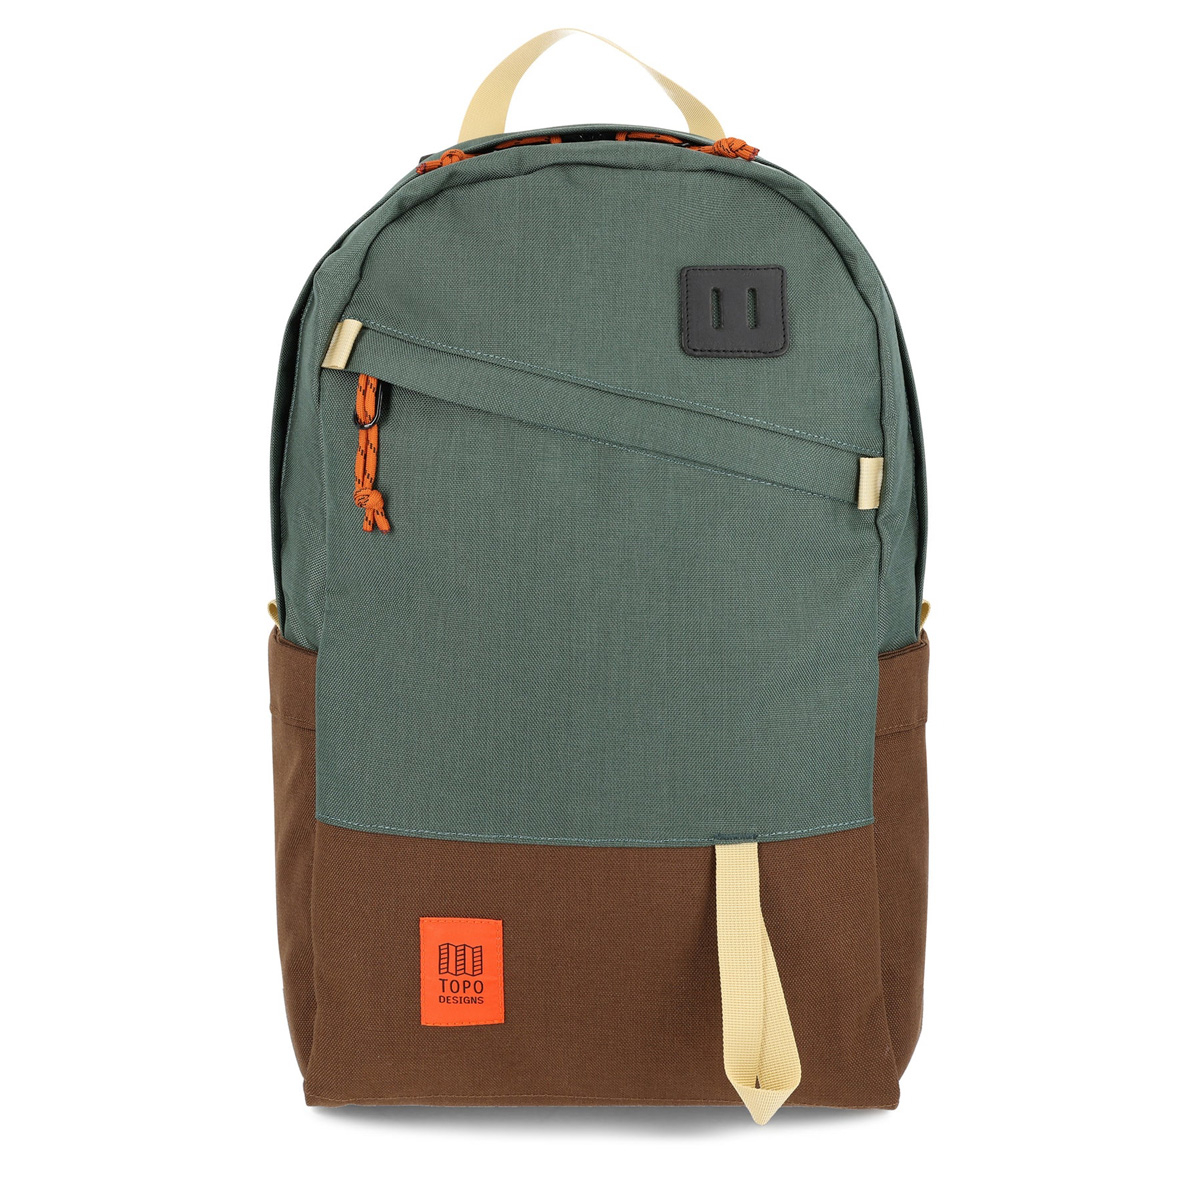 Topo Designs Daypack Classic Forest/Cocoa, it’s great as an everyday work bag, yet it has enough room for extra layers on the trail